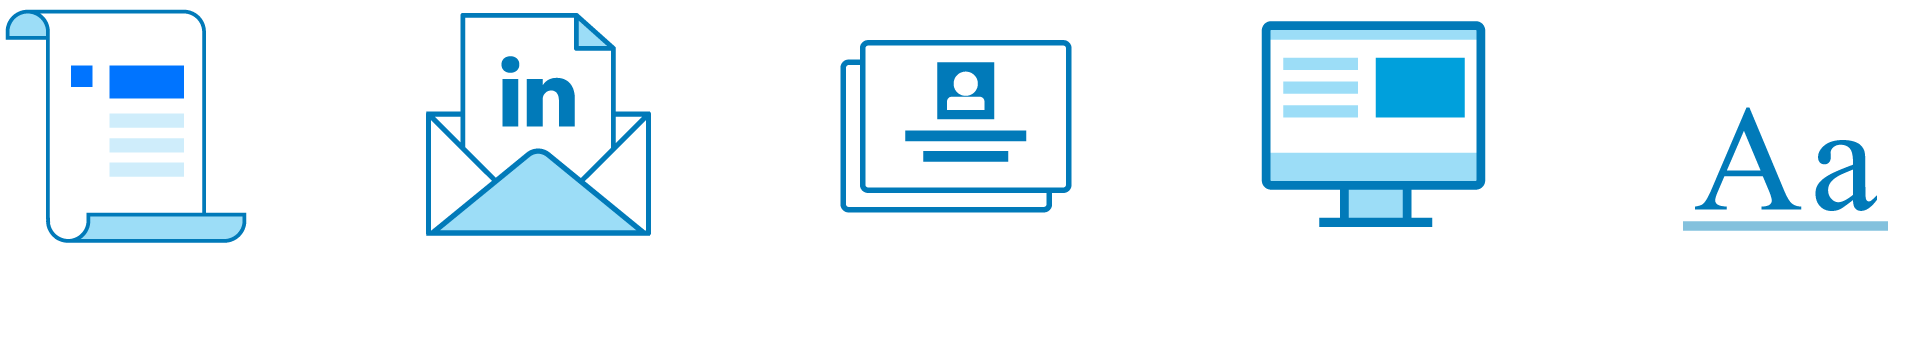 Linked In Advertising Options Overview PNG